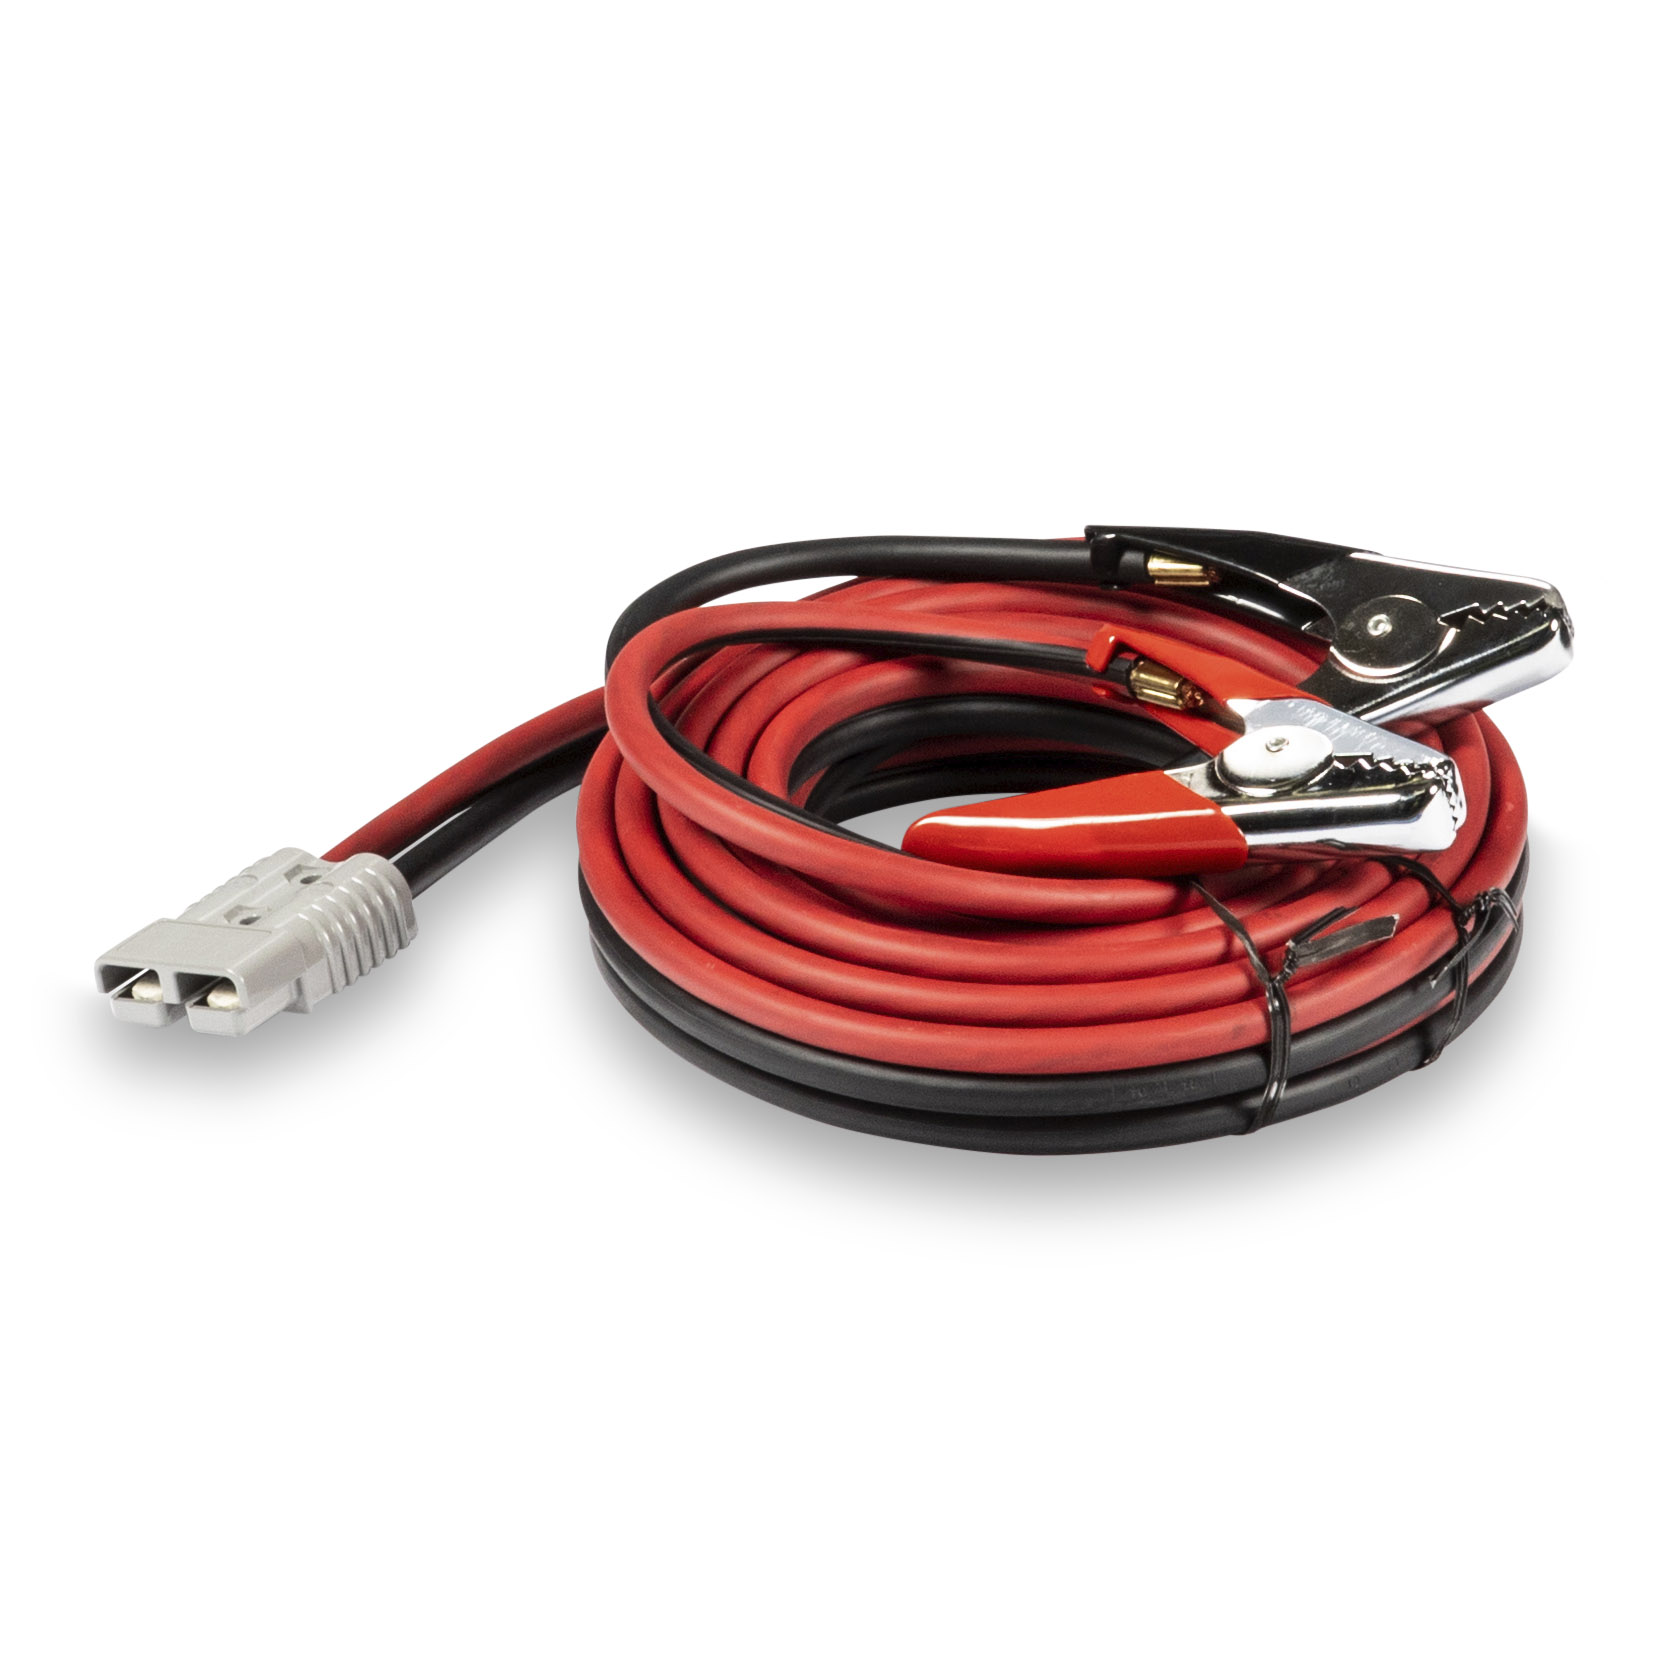 Miller Trailblazer 25-foot Battery Charge / Jump Start Cables with Plug